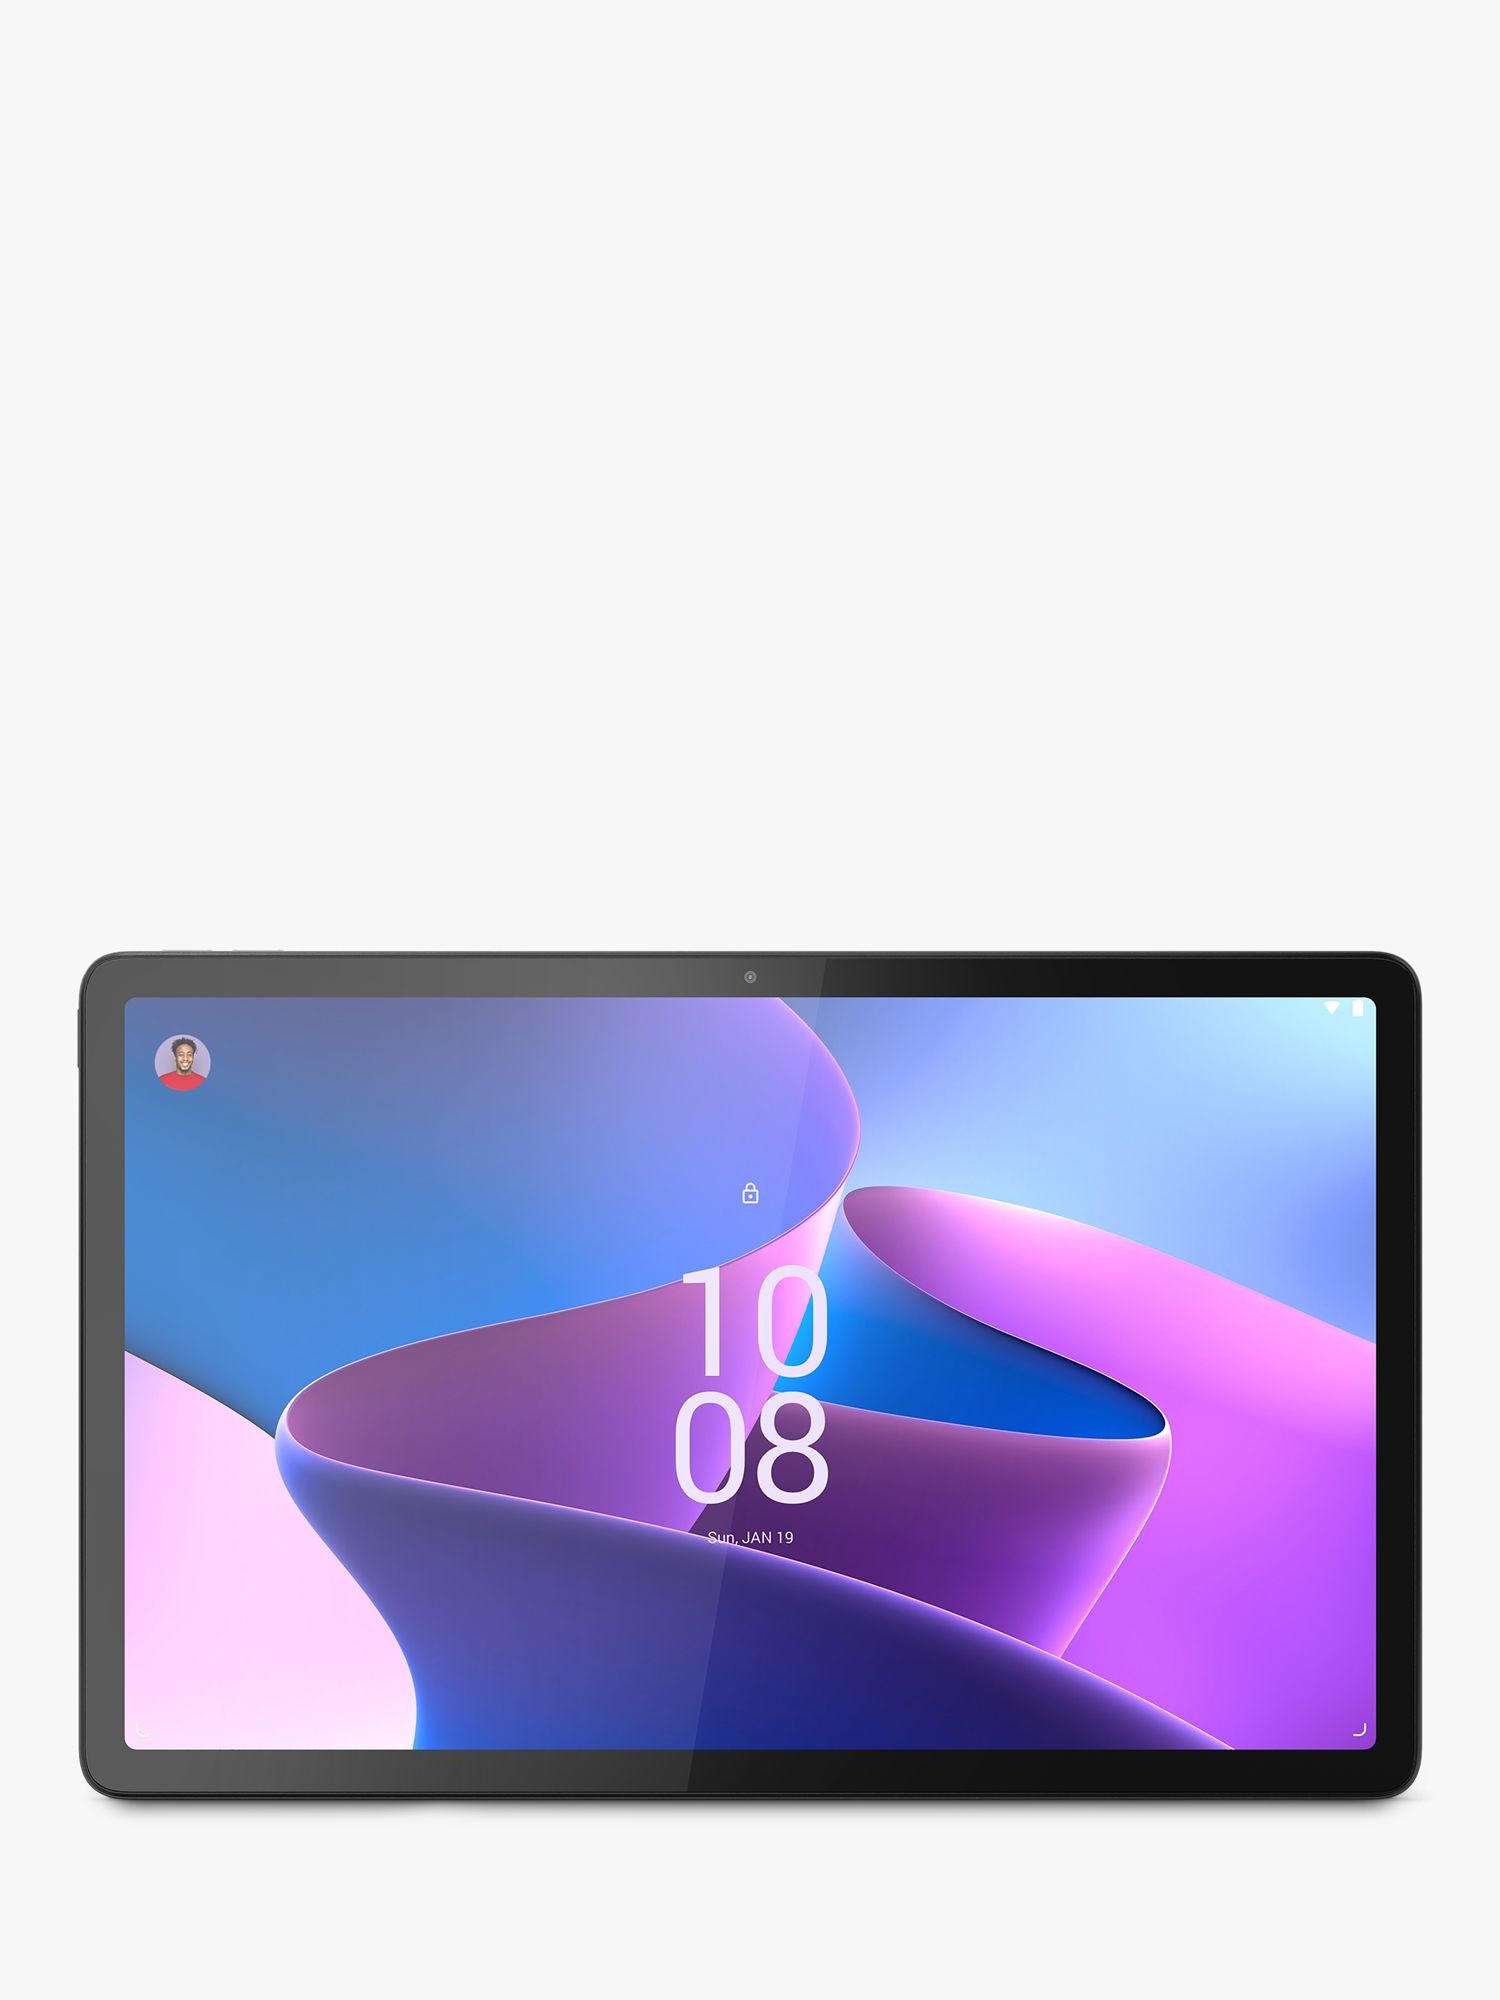 Introducing the New Lenovo Tab P12 Consumer Tablet